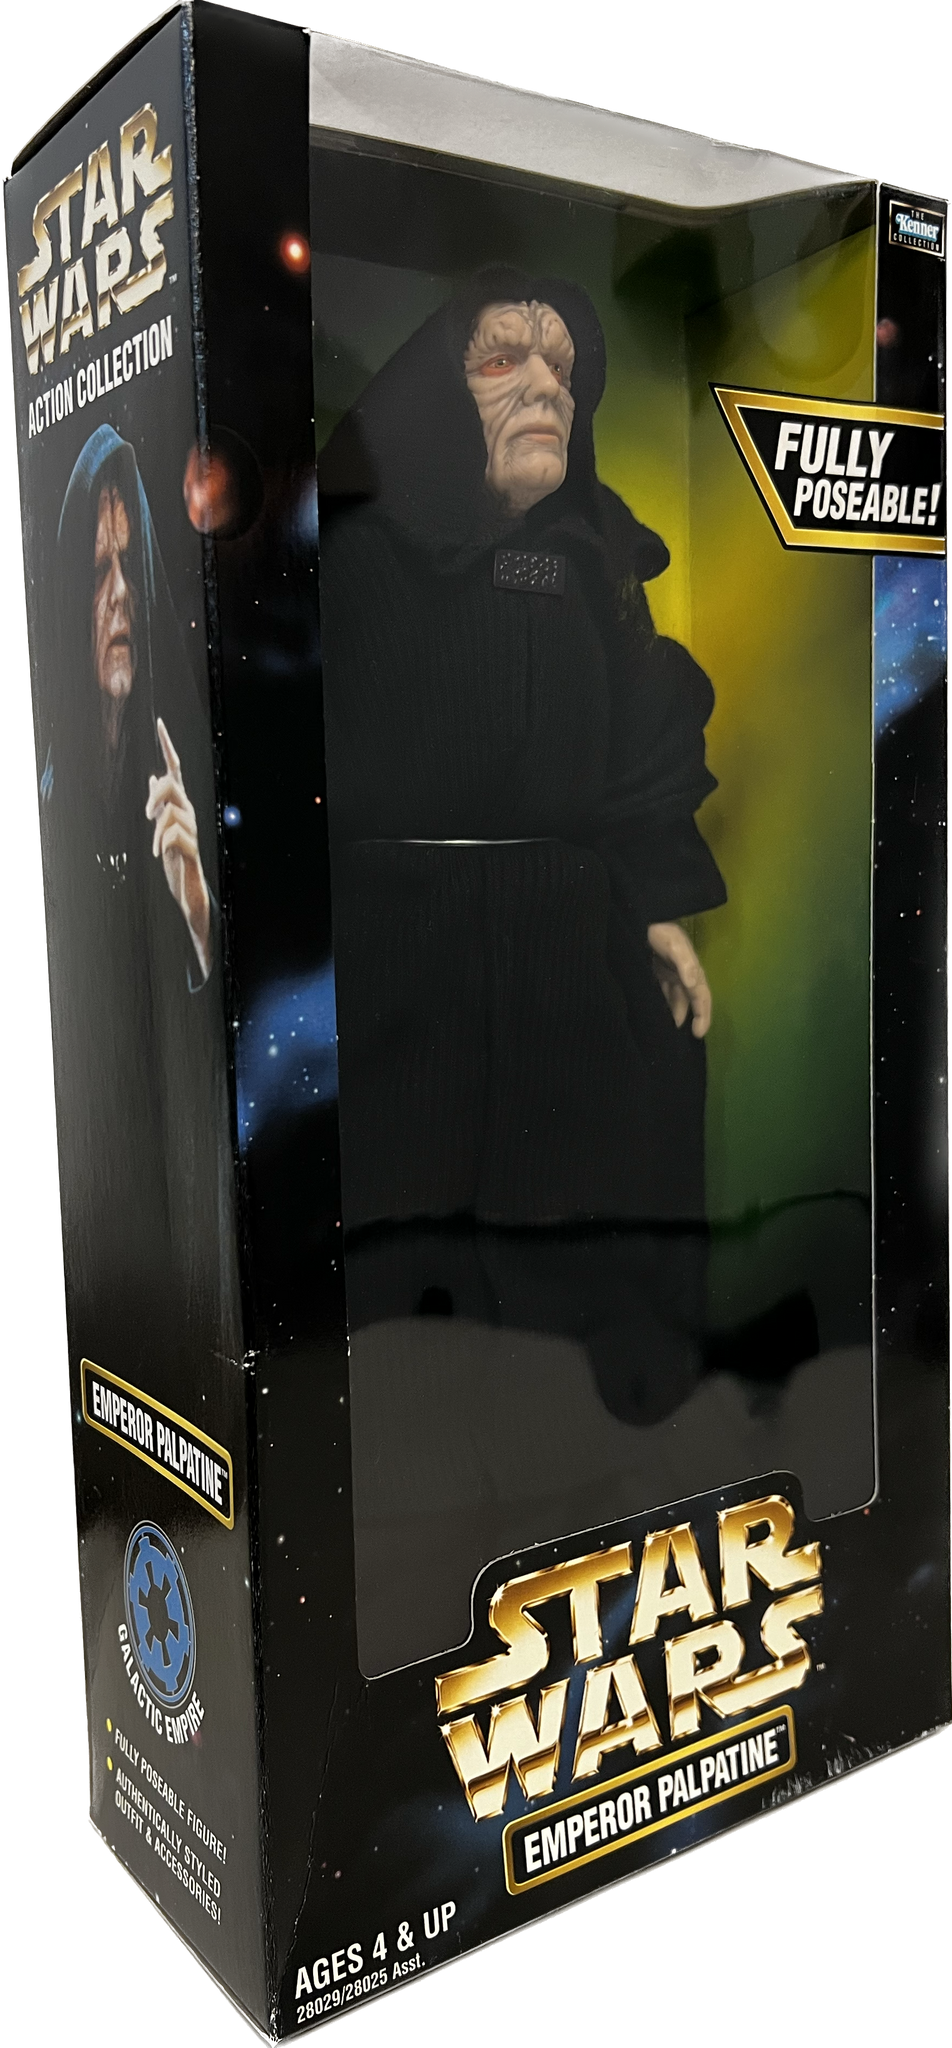 Star Wars Action Collection 12 inch Emperor Palpatine